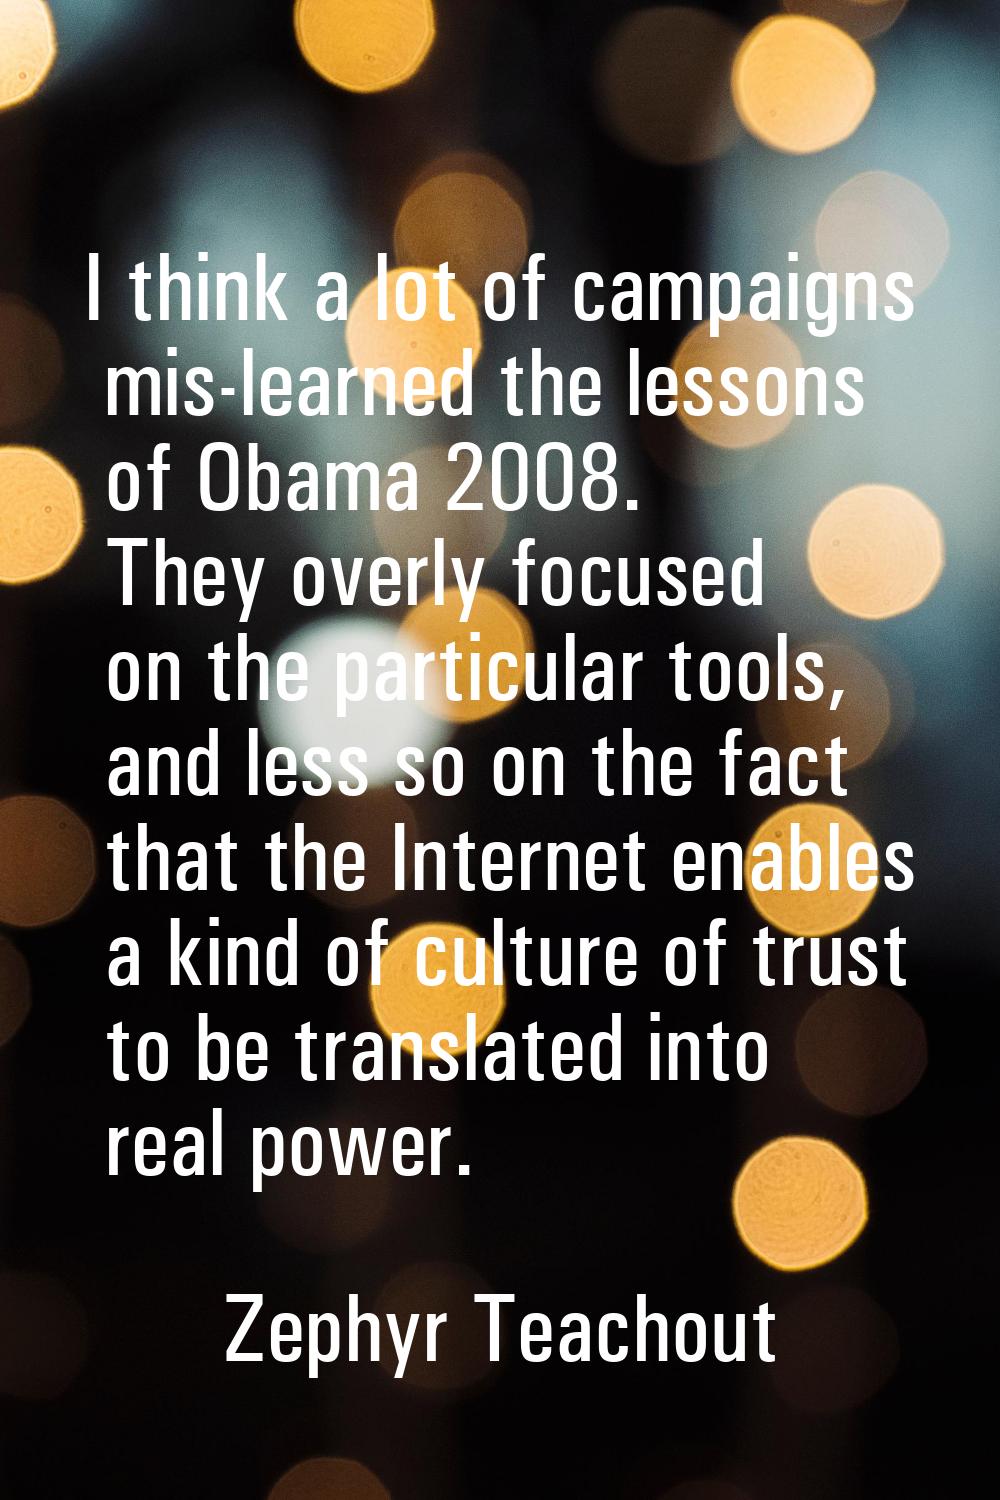 I think a lot of campaigns mis-learned the lessons of Obama 2008. They overly focused on the partic